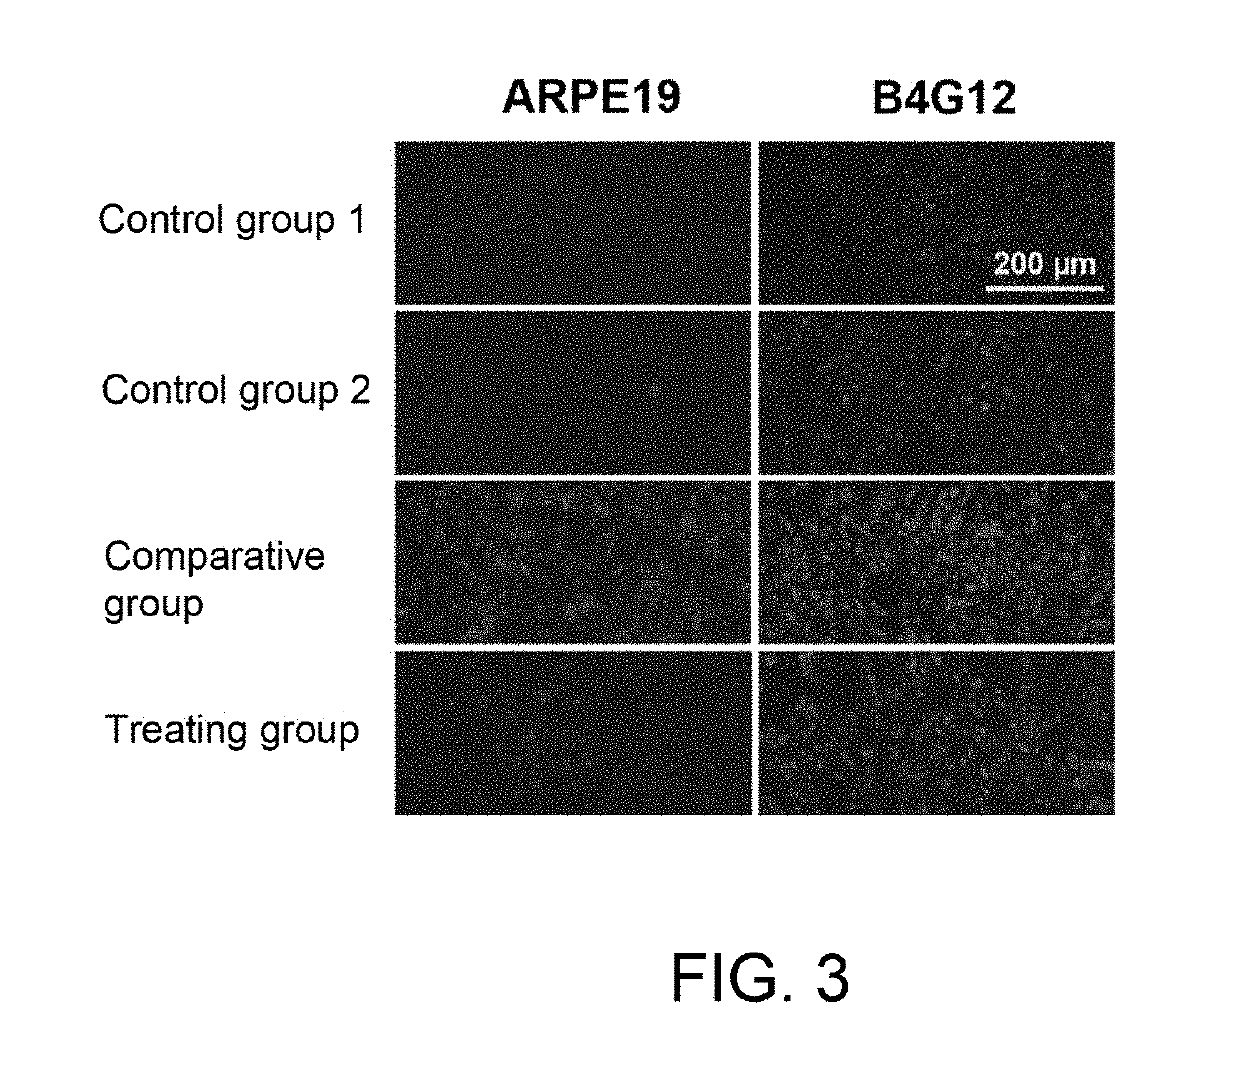 Method for protecting corneal endothelial cells from the impact caused by an eye surgery